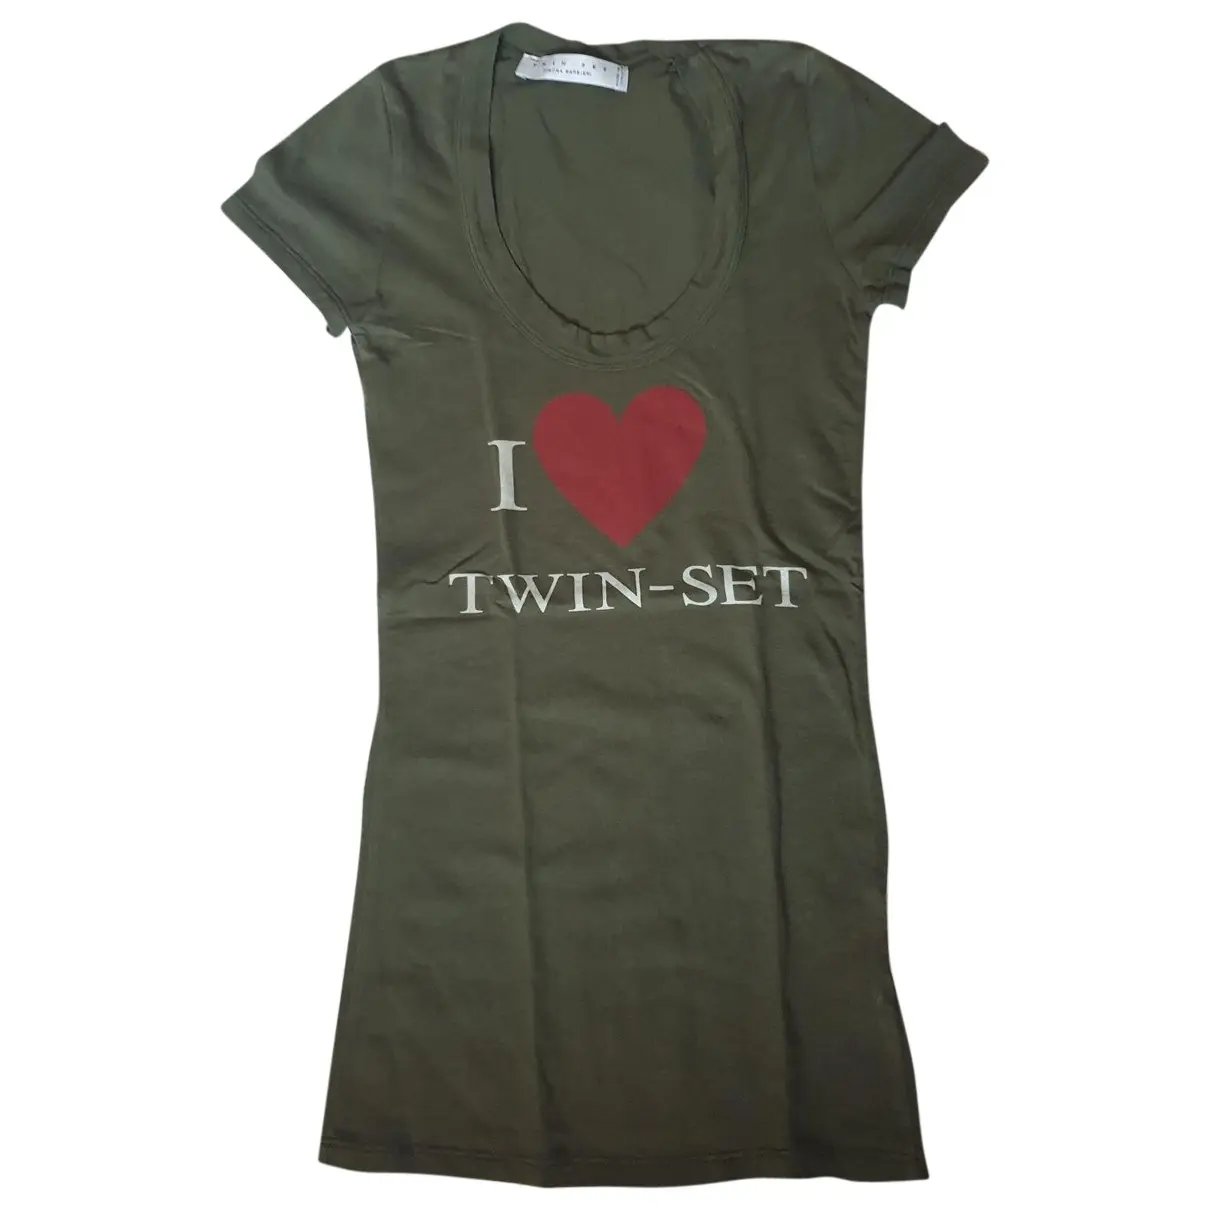 Green Cotton Top Twinset